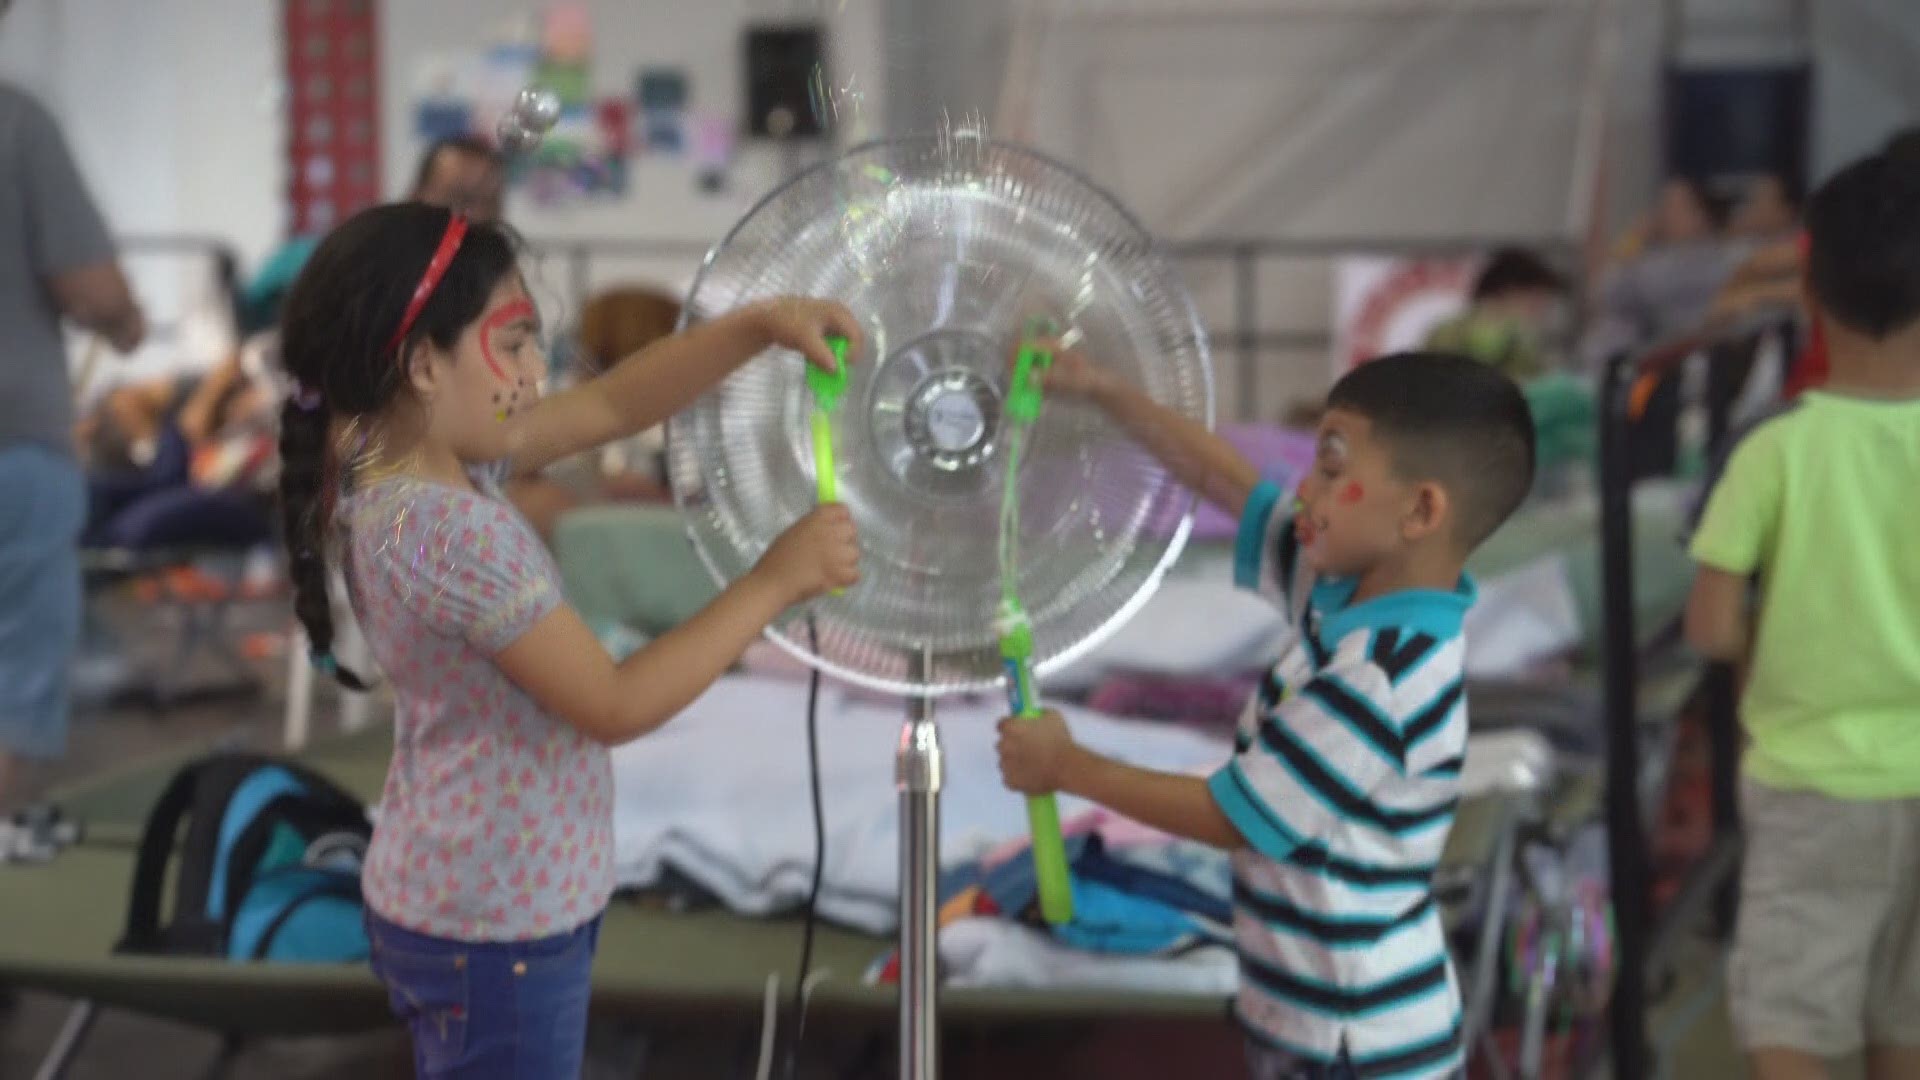 Following the devastating earthquake that hit Puerto Rico, thousands of families found themselves in shelters. But, the kids still found ways to have fun.